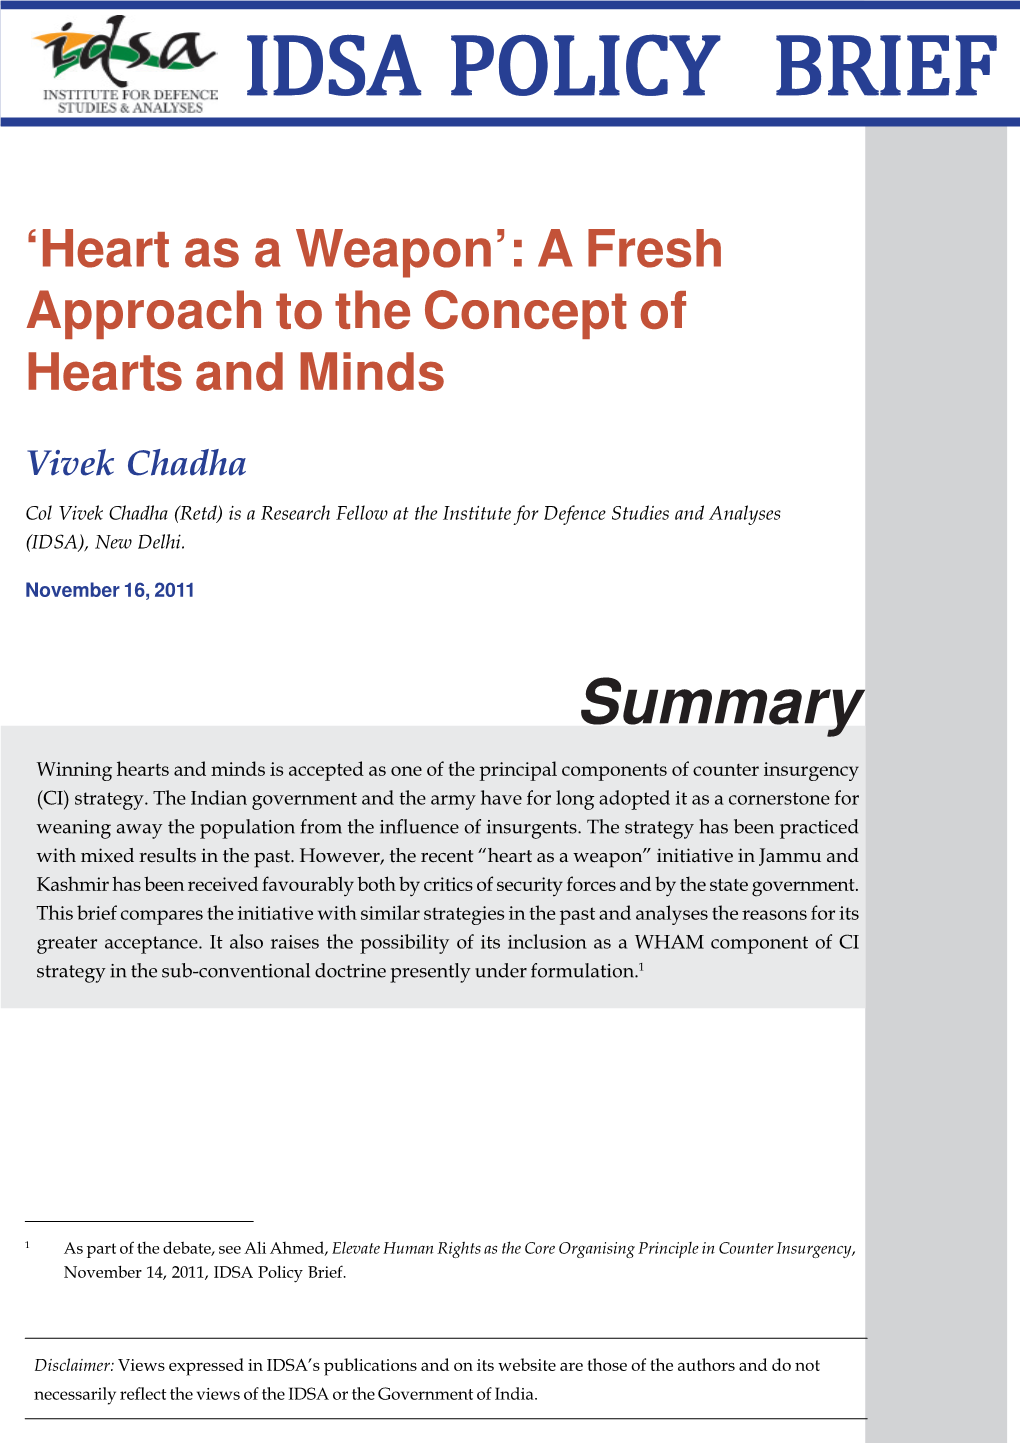 'Heart As a Weapon'